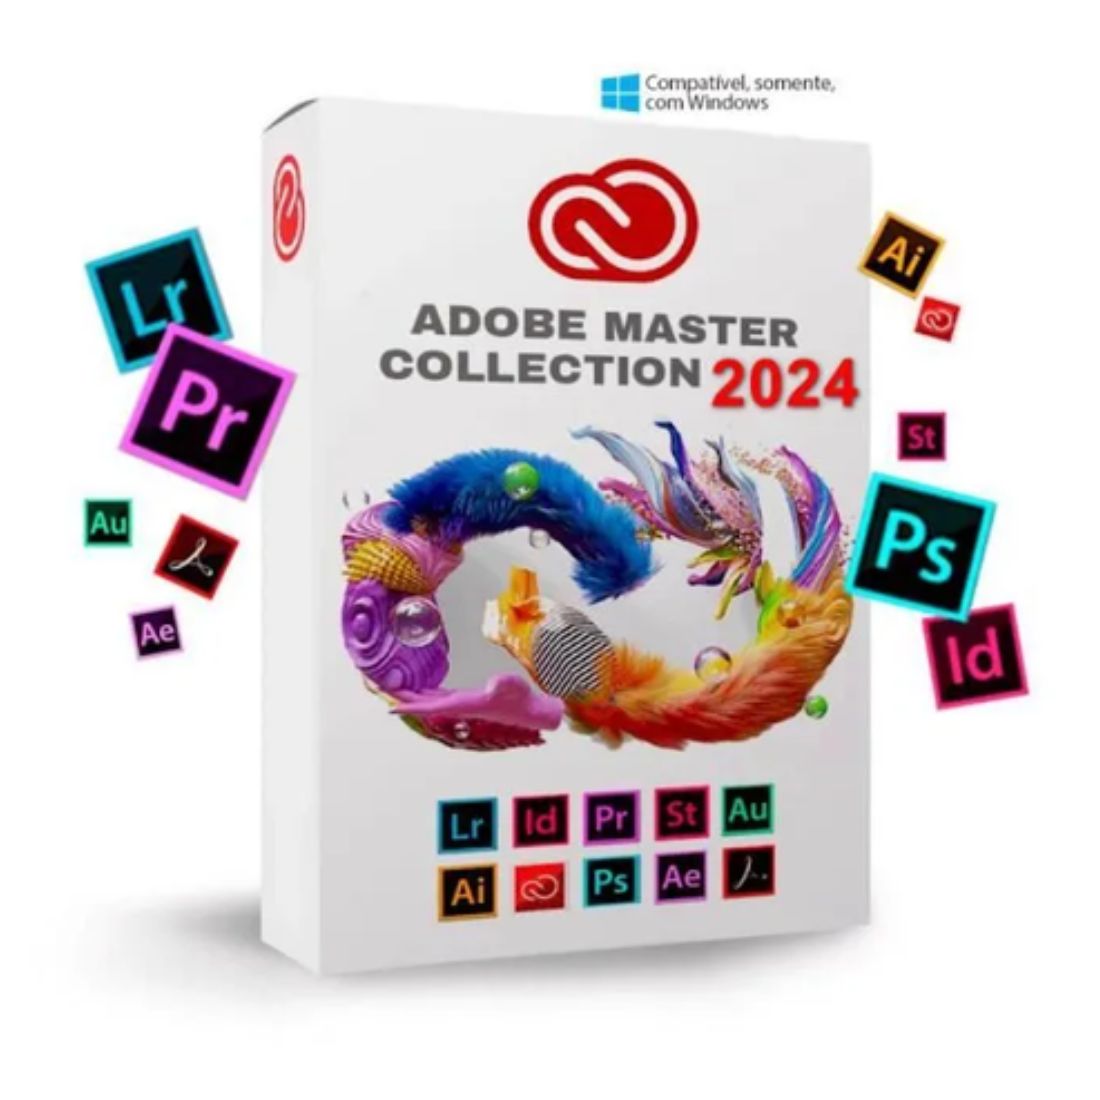 Adobe Master Collection 2024 cover image.